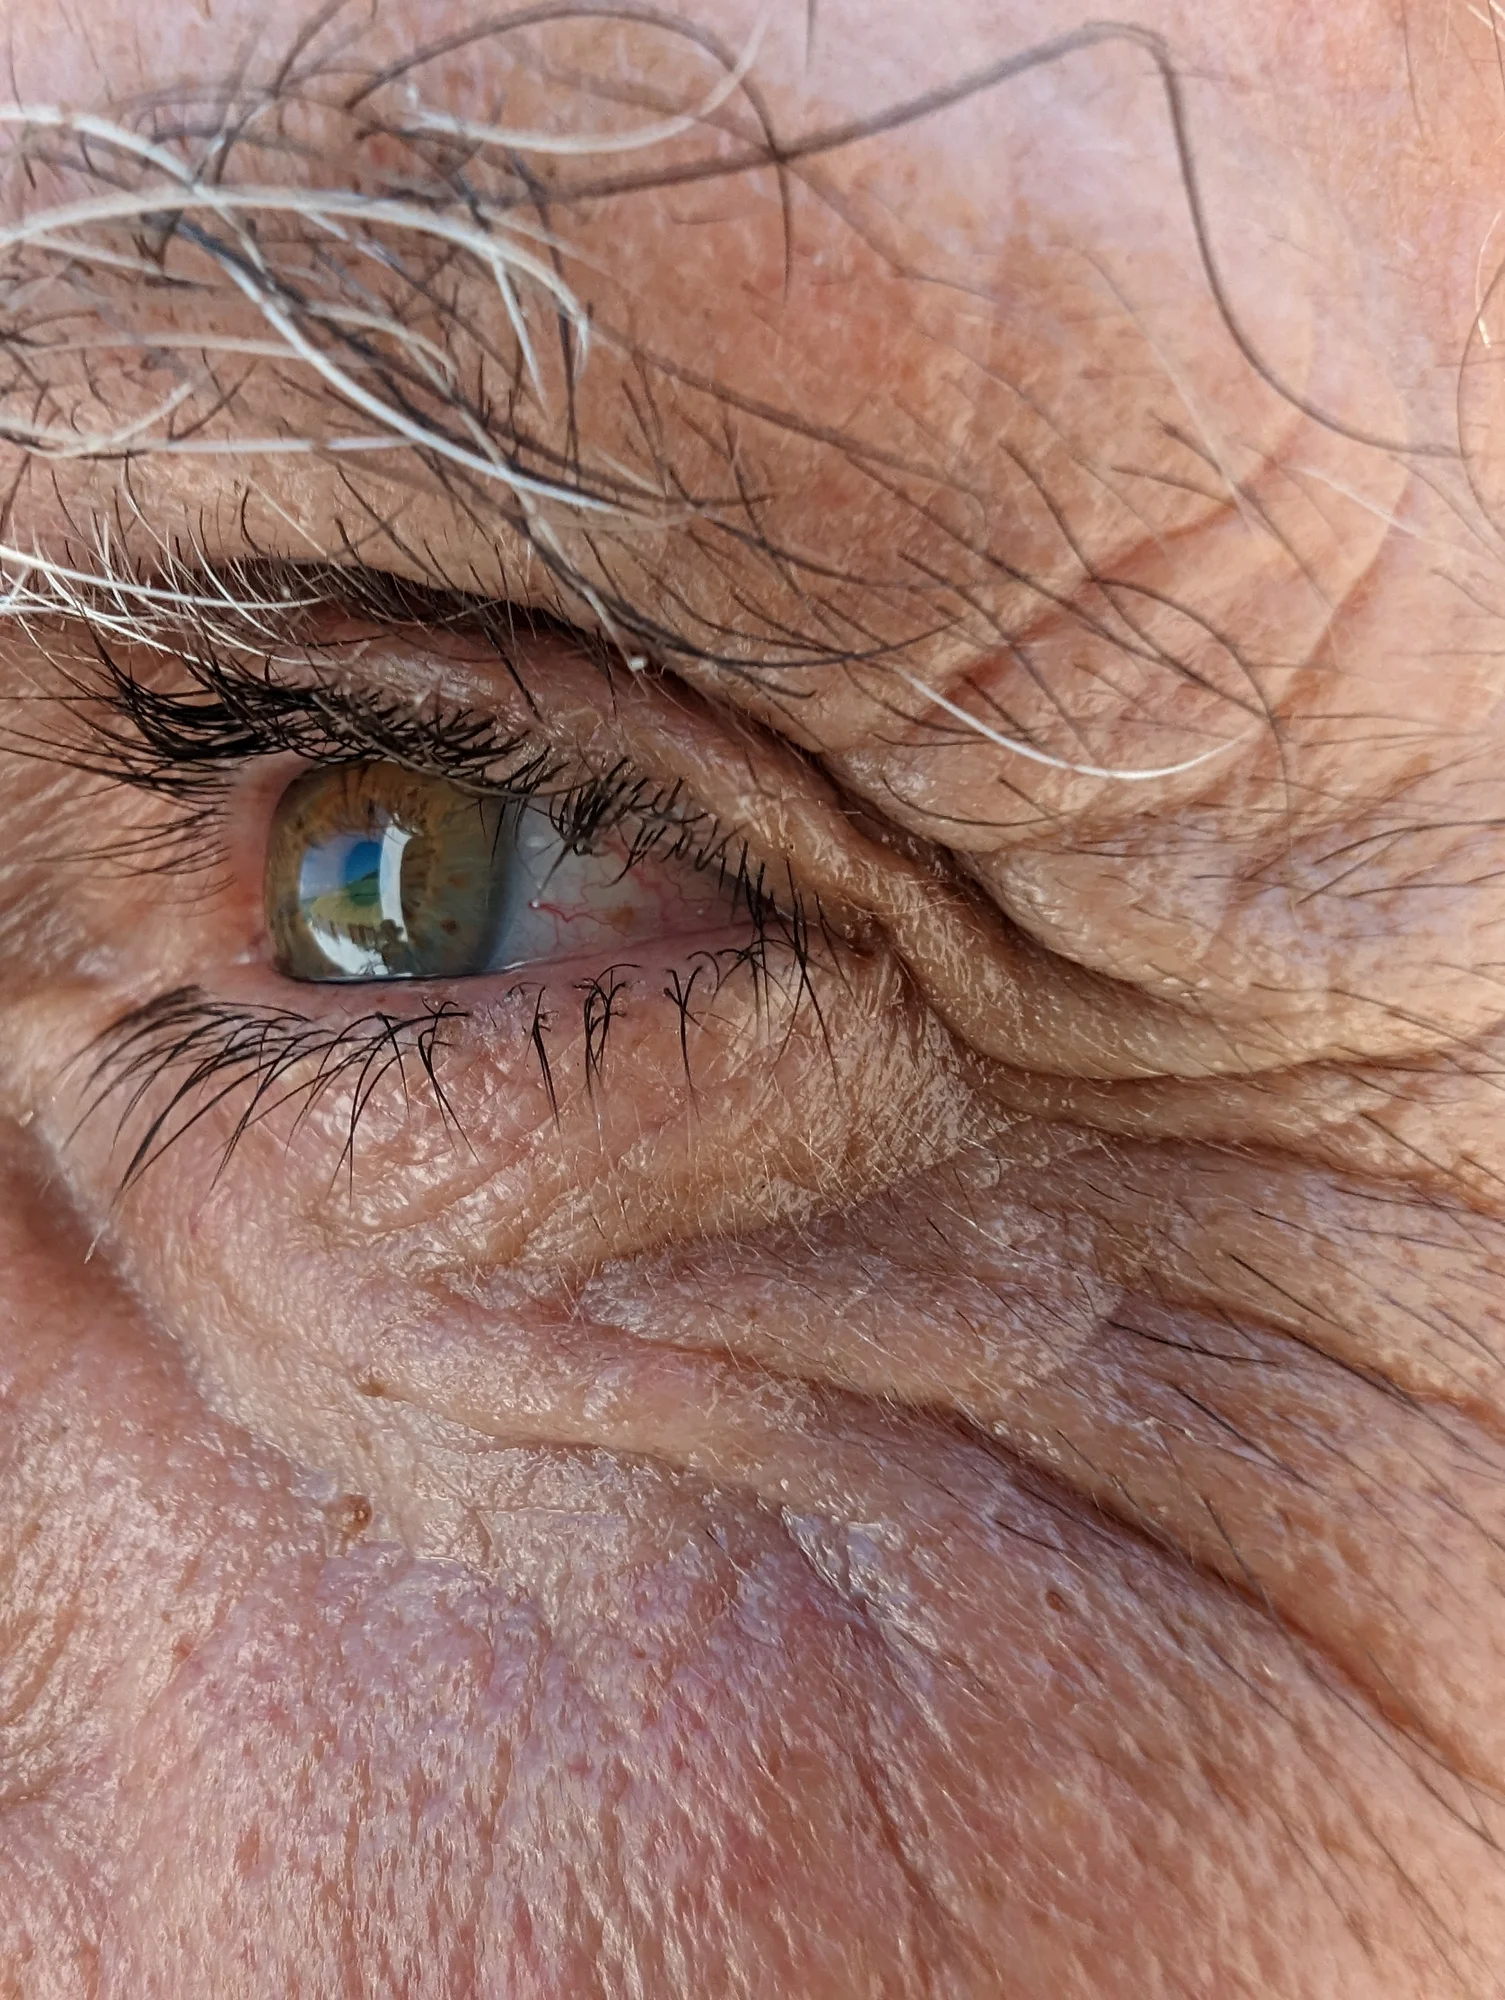 A photo of a person’s eye and eyebrow